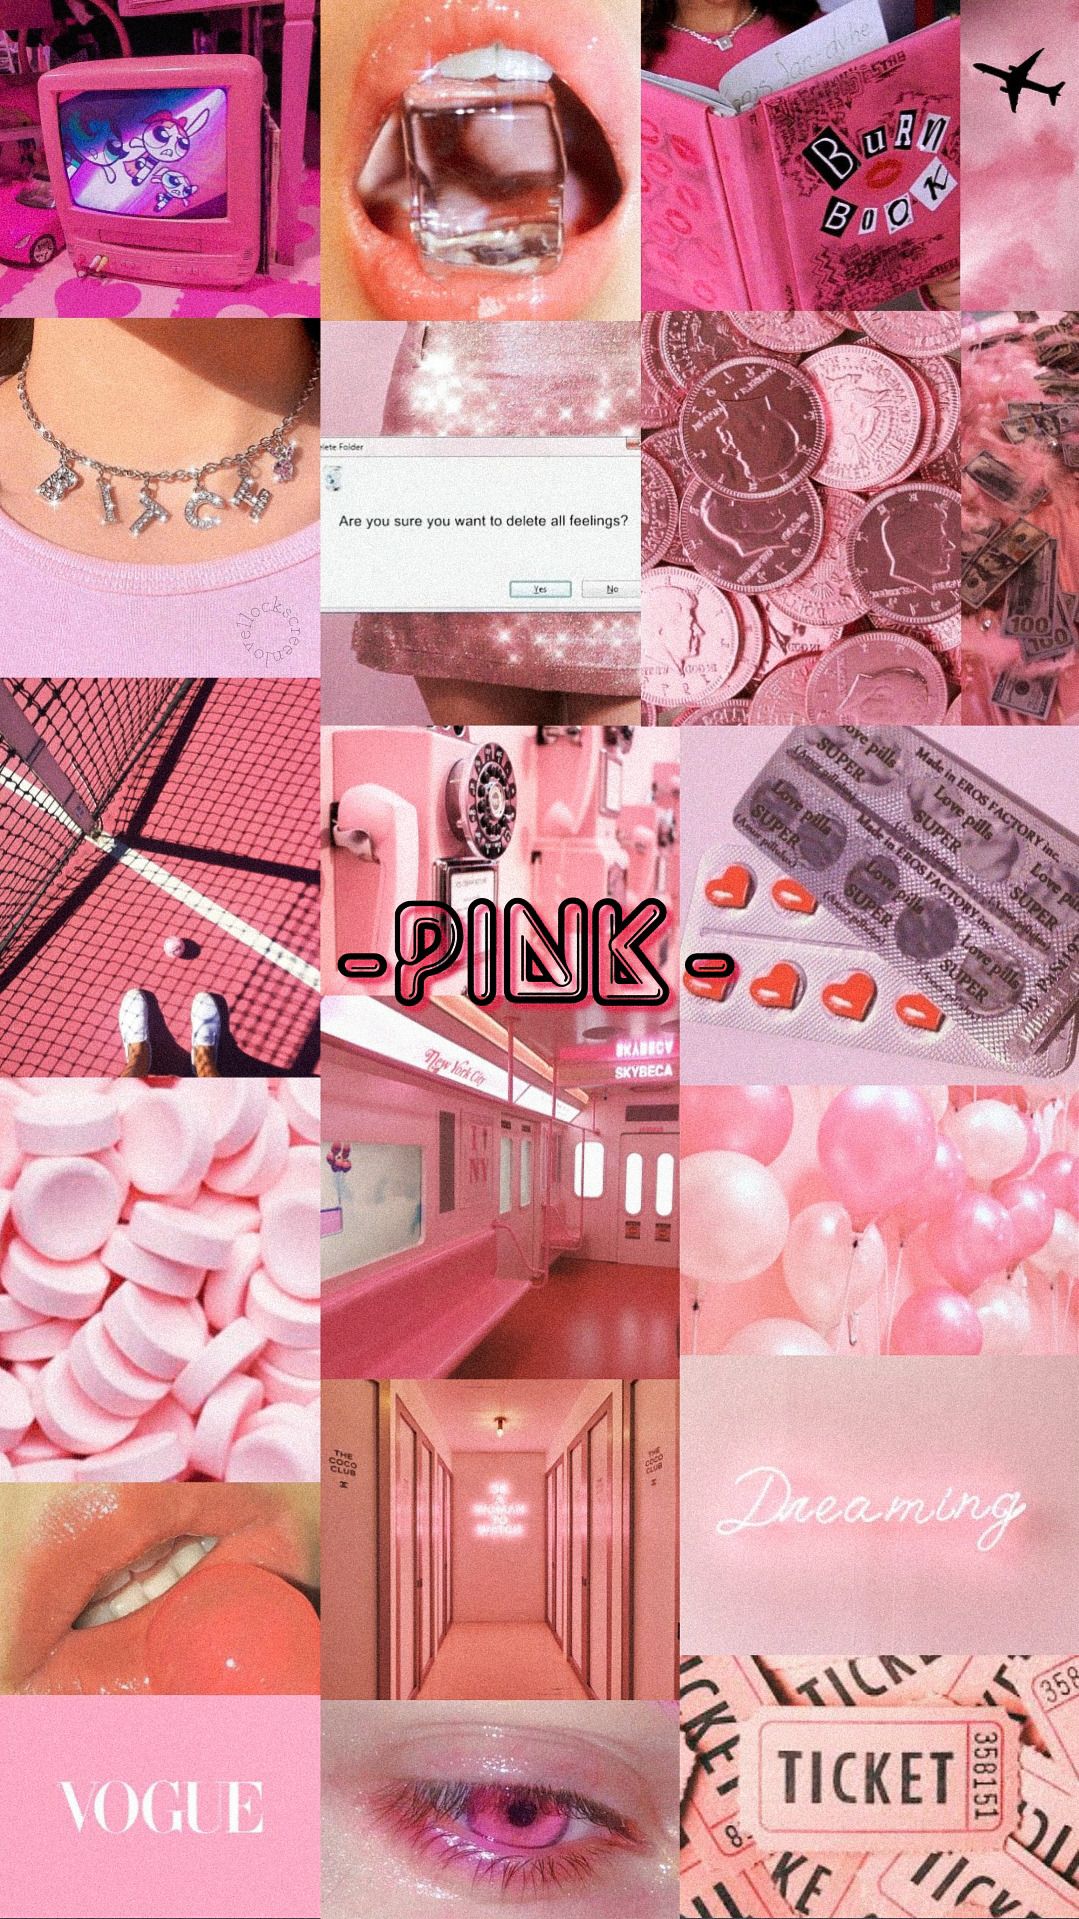 Aesthetic pink wallpaper for phone background. - Pink collage